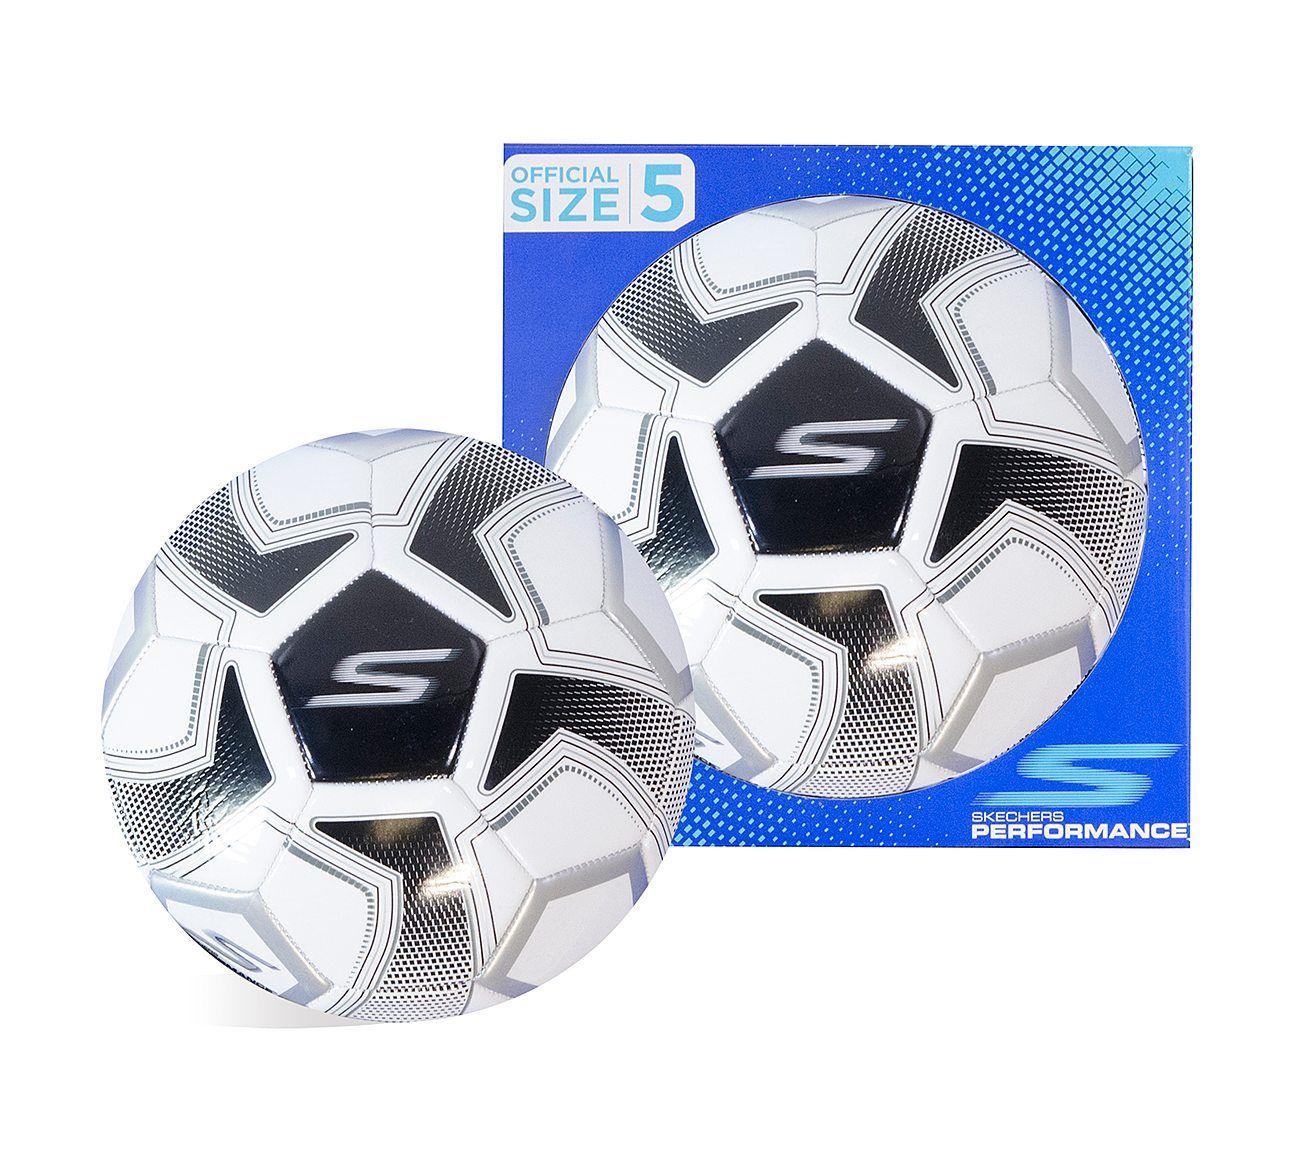 Shoe Kicking Soccer Ball Logo - Buy SKECHERS Official Size 5 Soccer Ball Accessories Shoes only $20.00